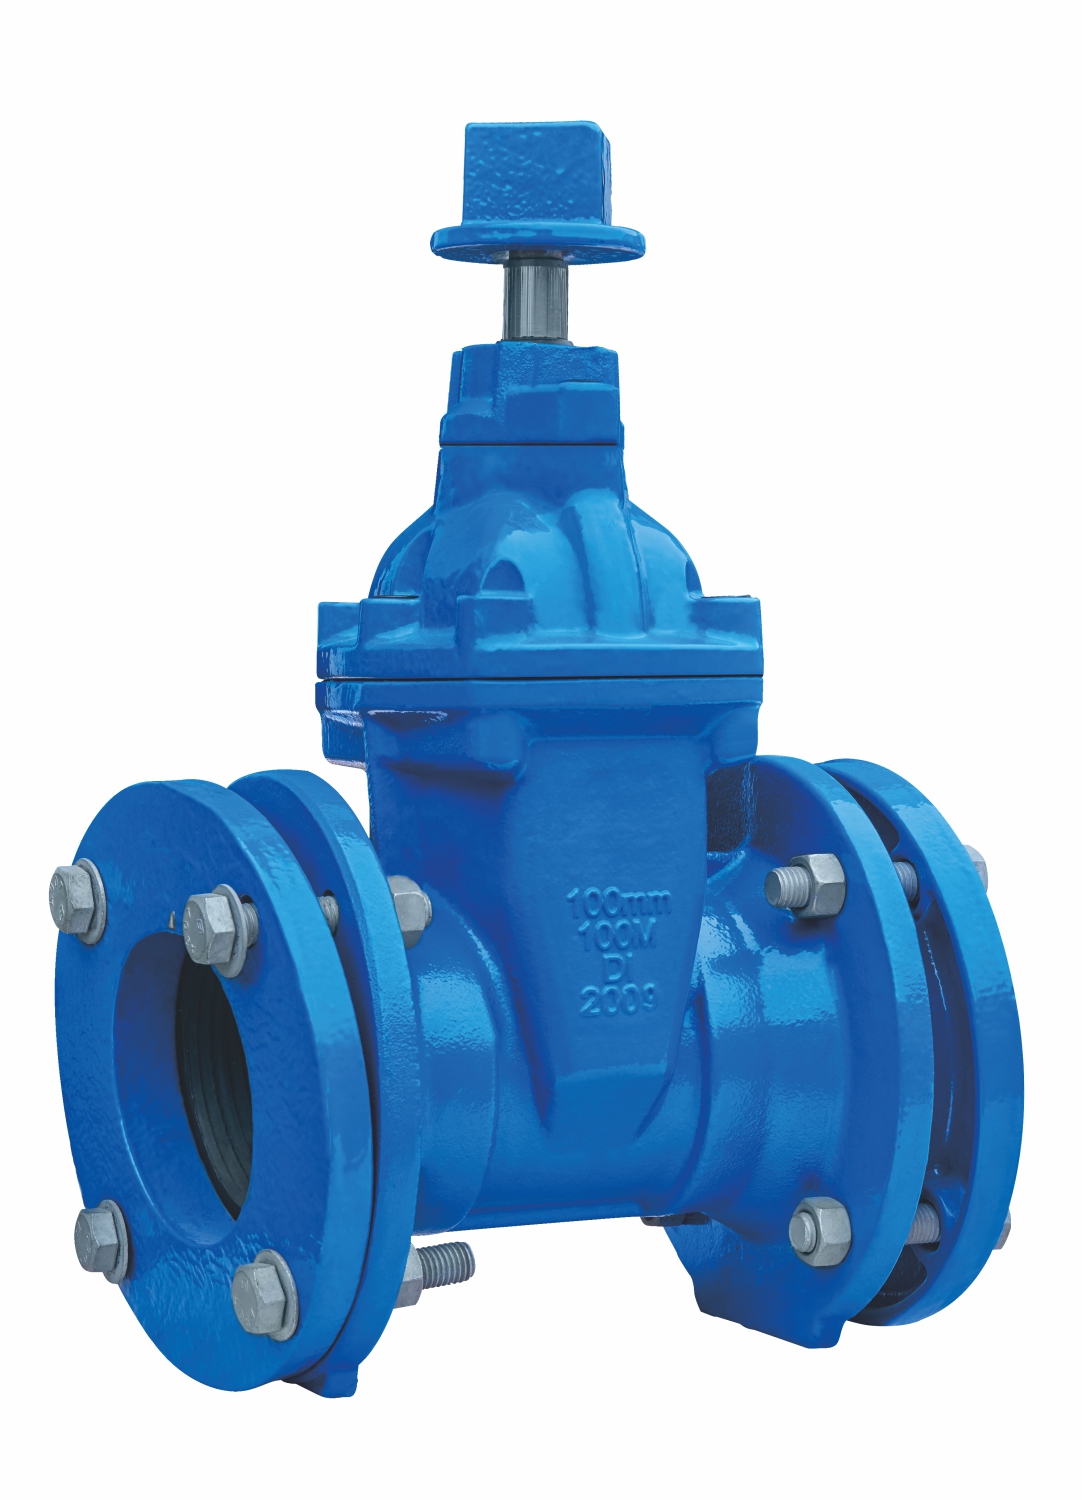 NRS/RS MJXMJ Gate Valve With Double Flange